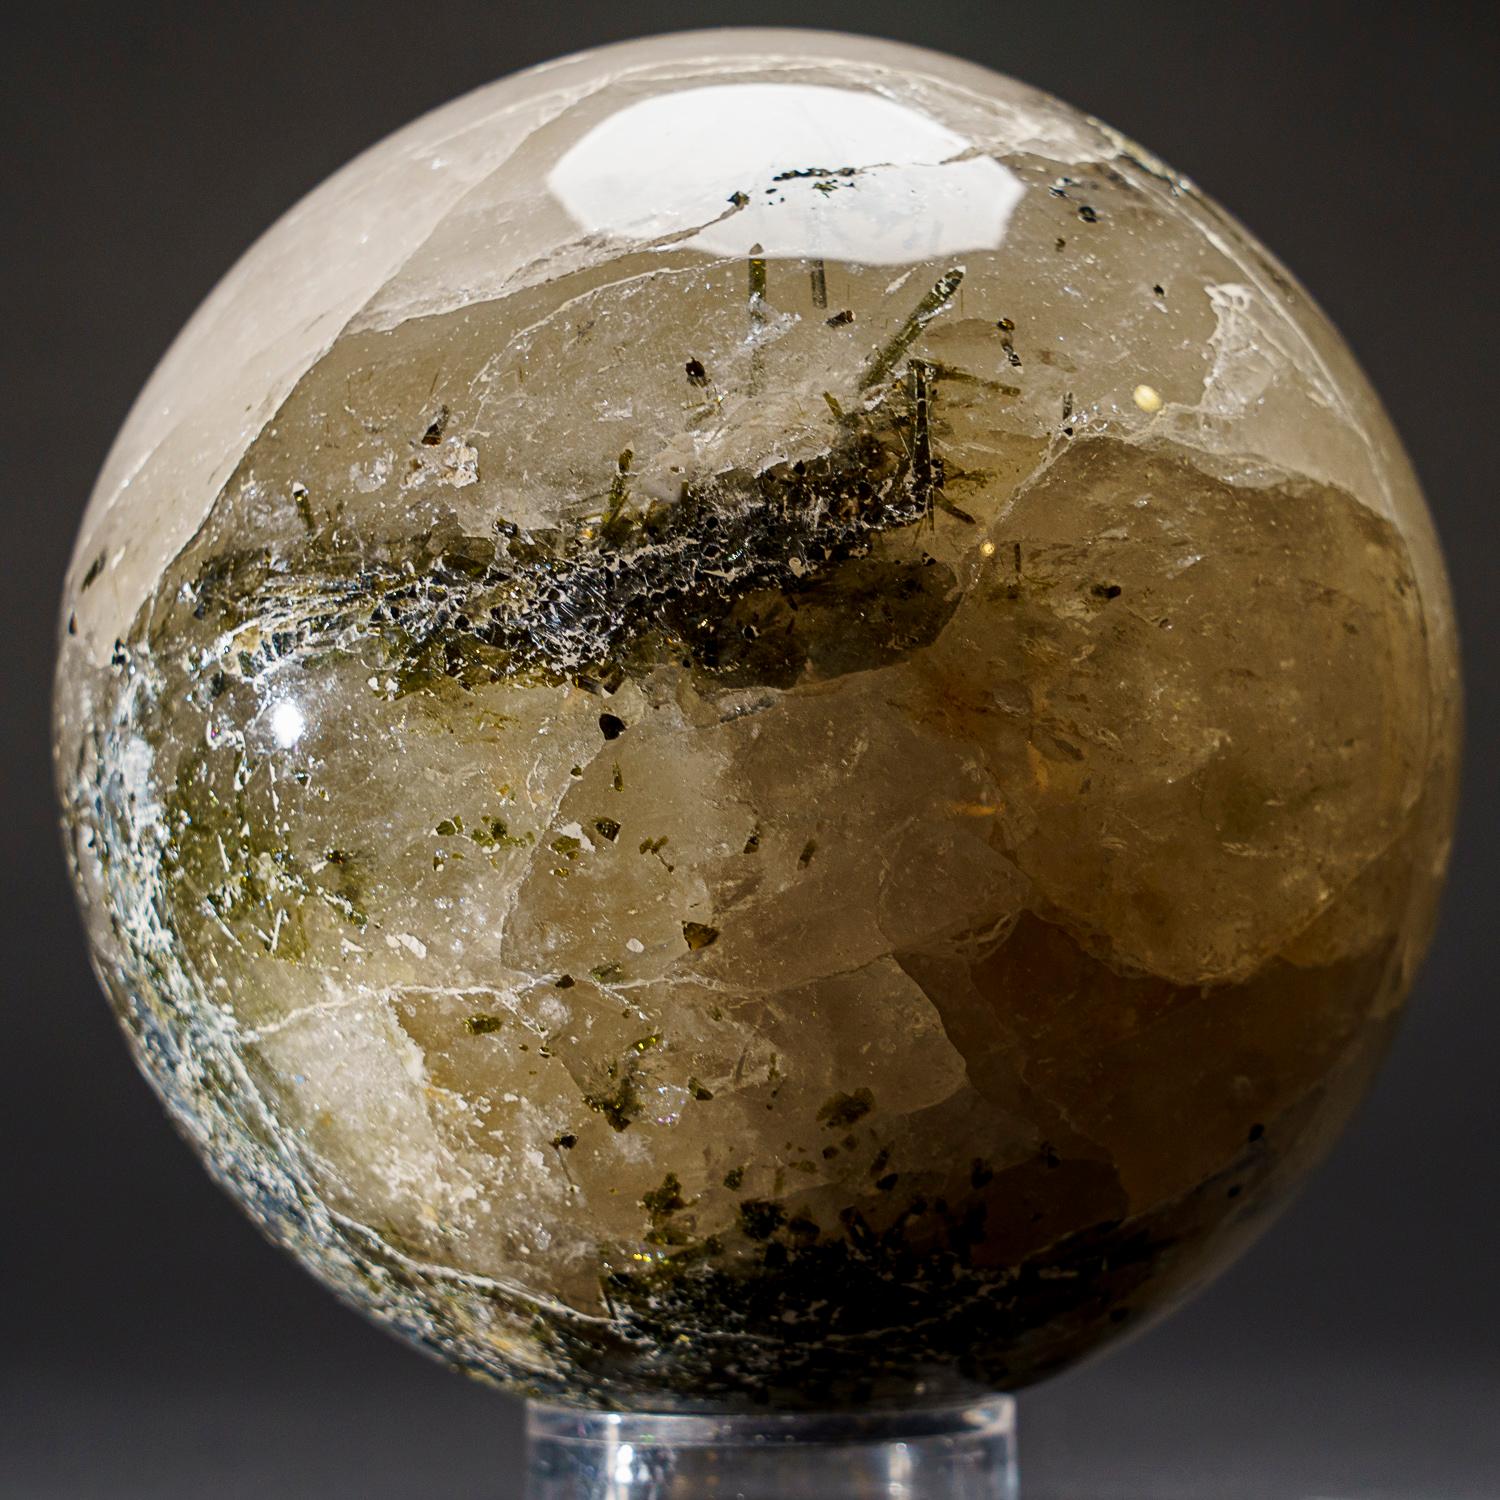 This Genuine Polished Quartz with Tourmaline Sphere boasts impressive transparency and a smooth, reflective finish due to careful hand polishing. By combining the grounding properties of Quartz with the protective energies of Tourmaline, this sphere